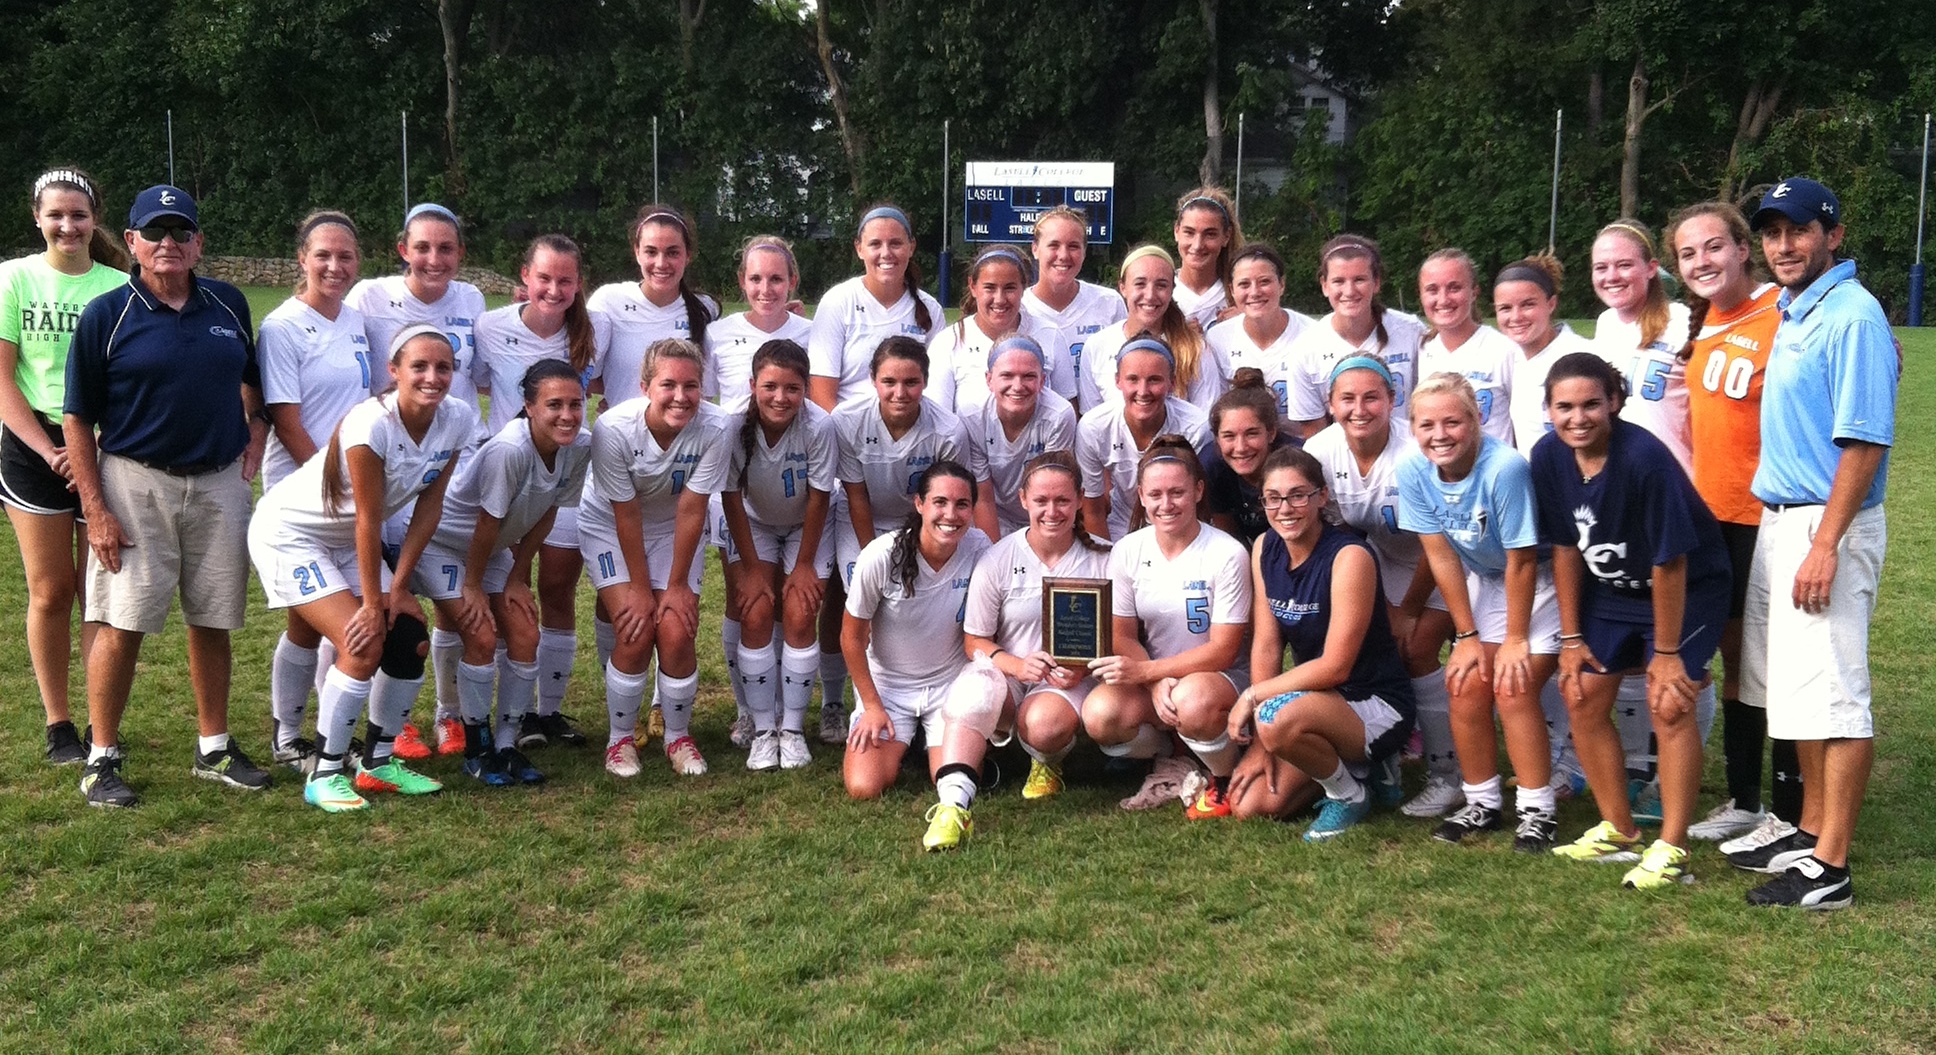 Women's Soccer Claims Kick-off Tournament Title with 3-1 Win